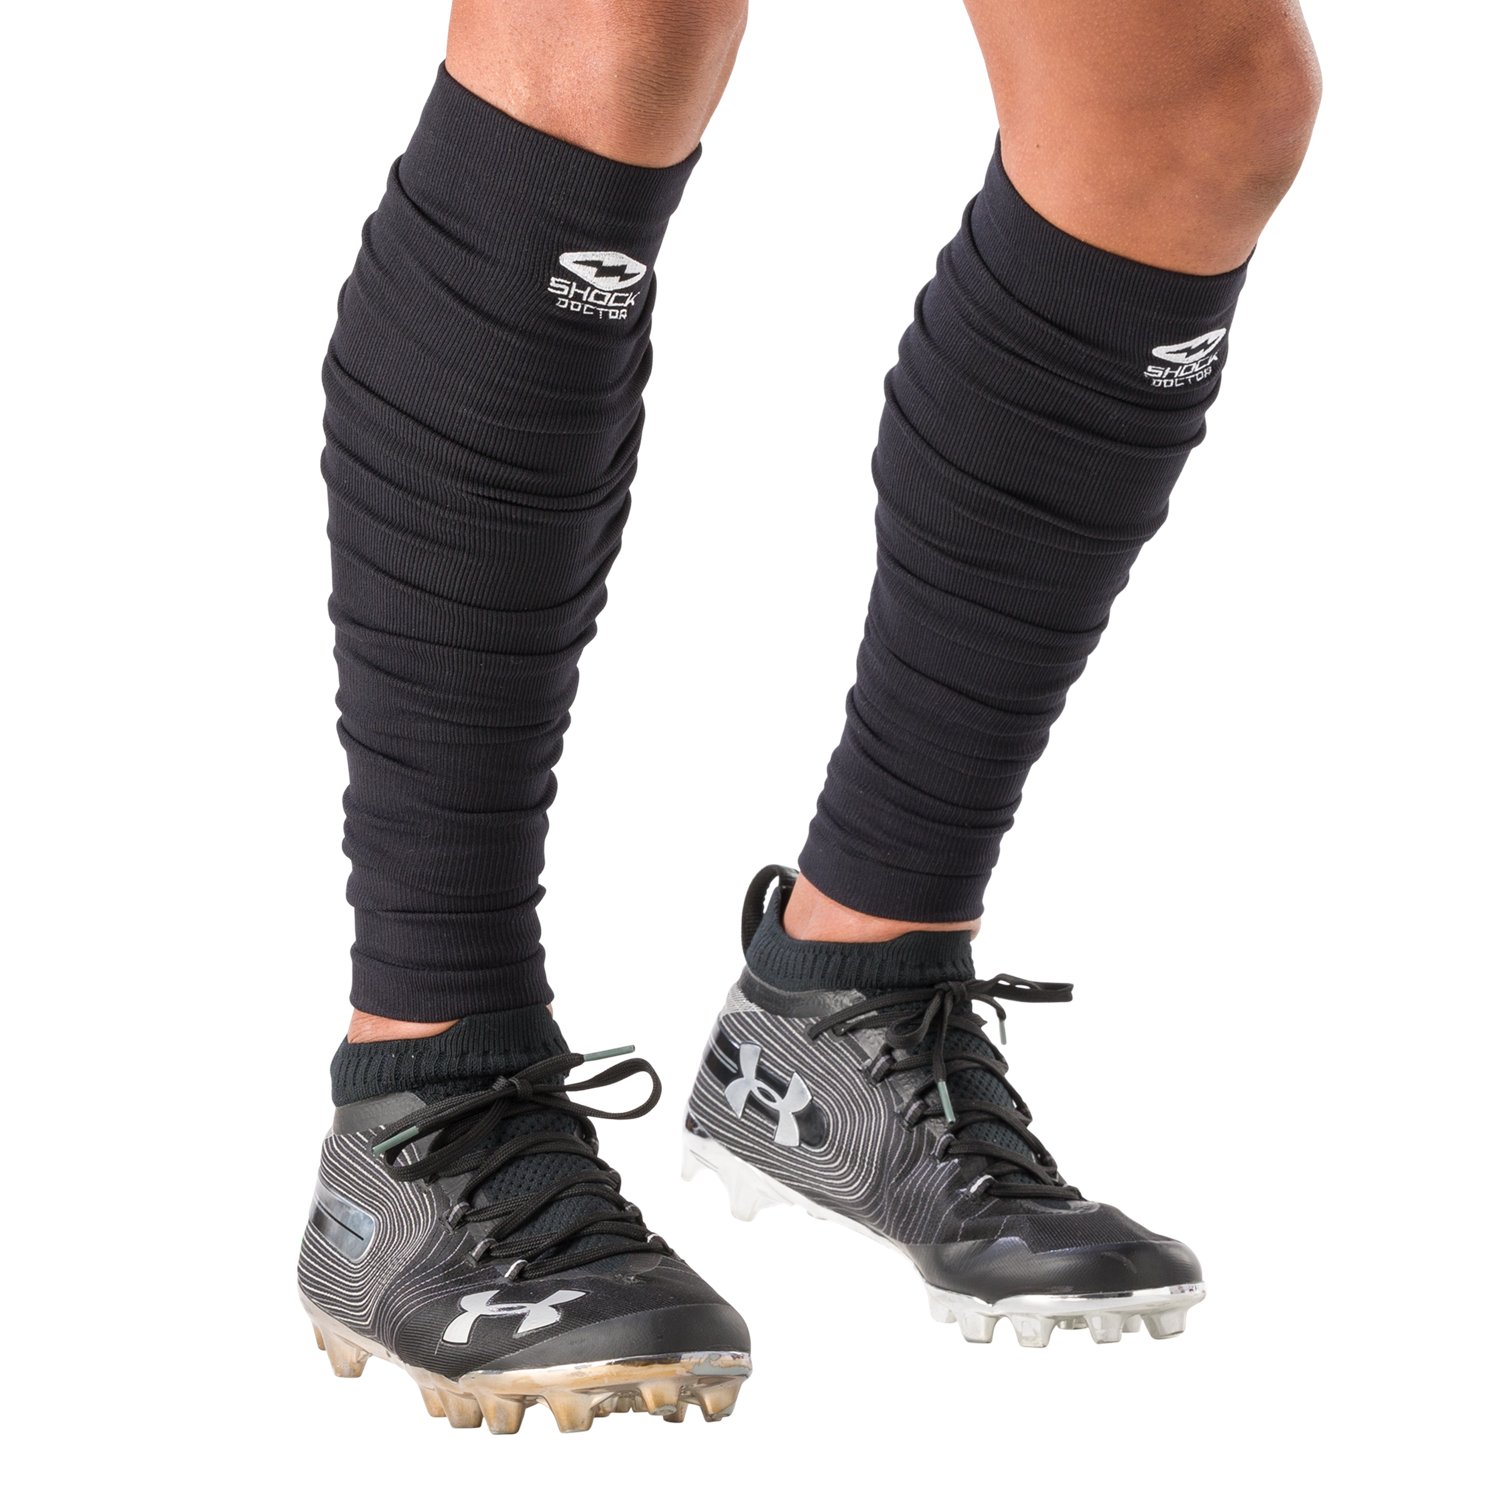 Flame Compression Arm Sleeve Youth/Kids & Adult Sizes - Baseball Basketball  Foot